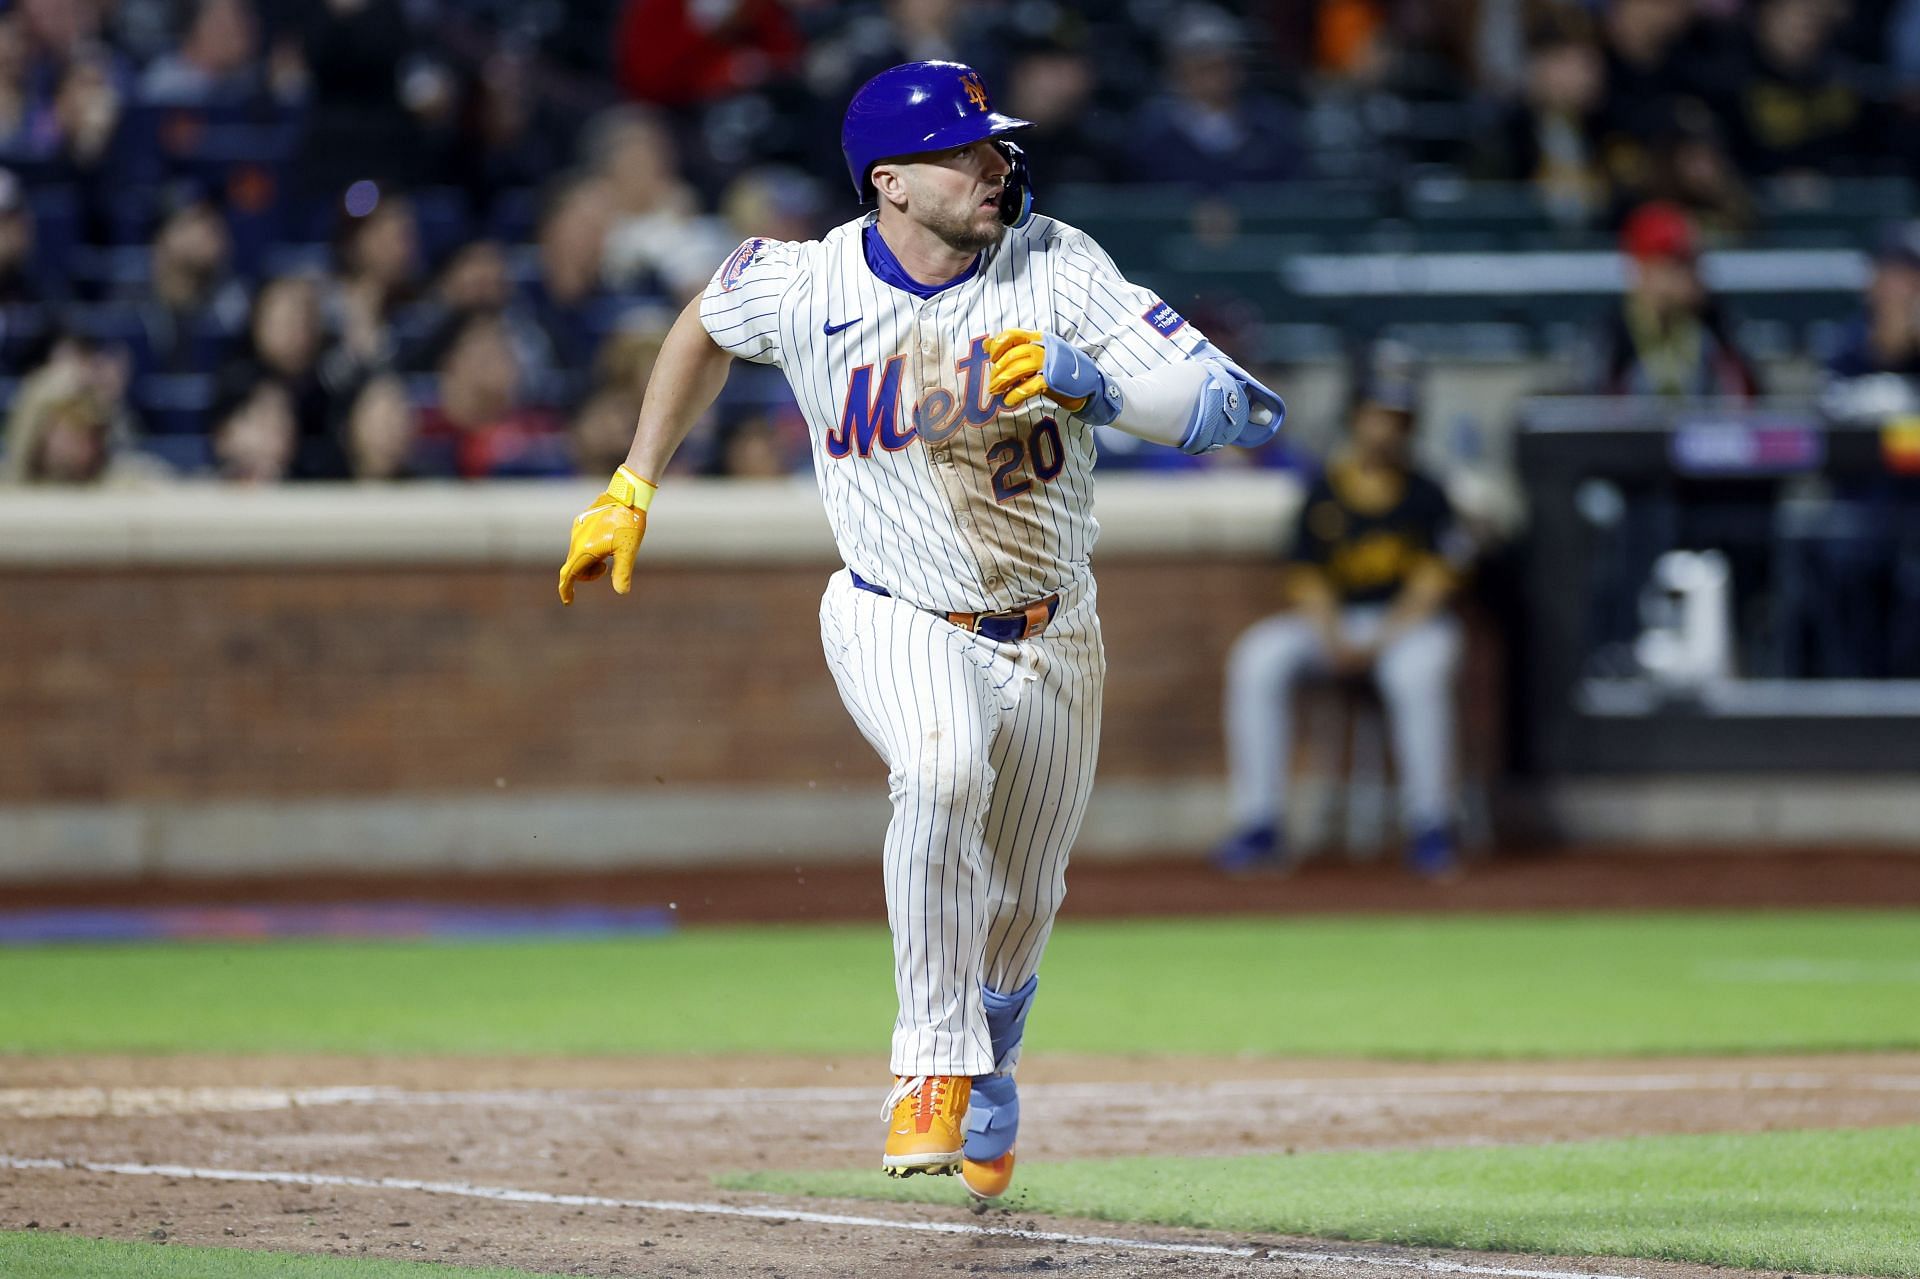 The Mets win over the Pirates on Tuesday marks their fourth straight series win. 